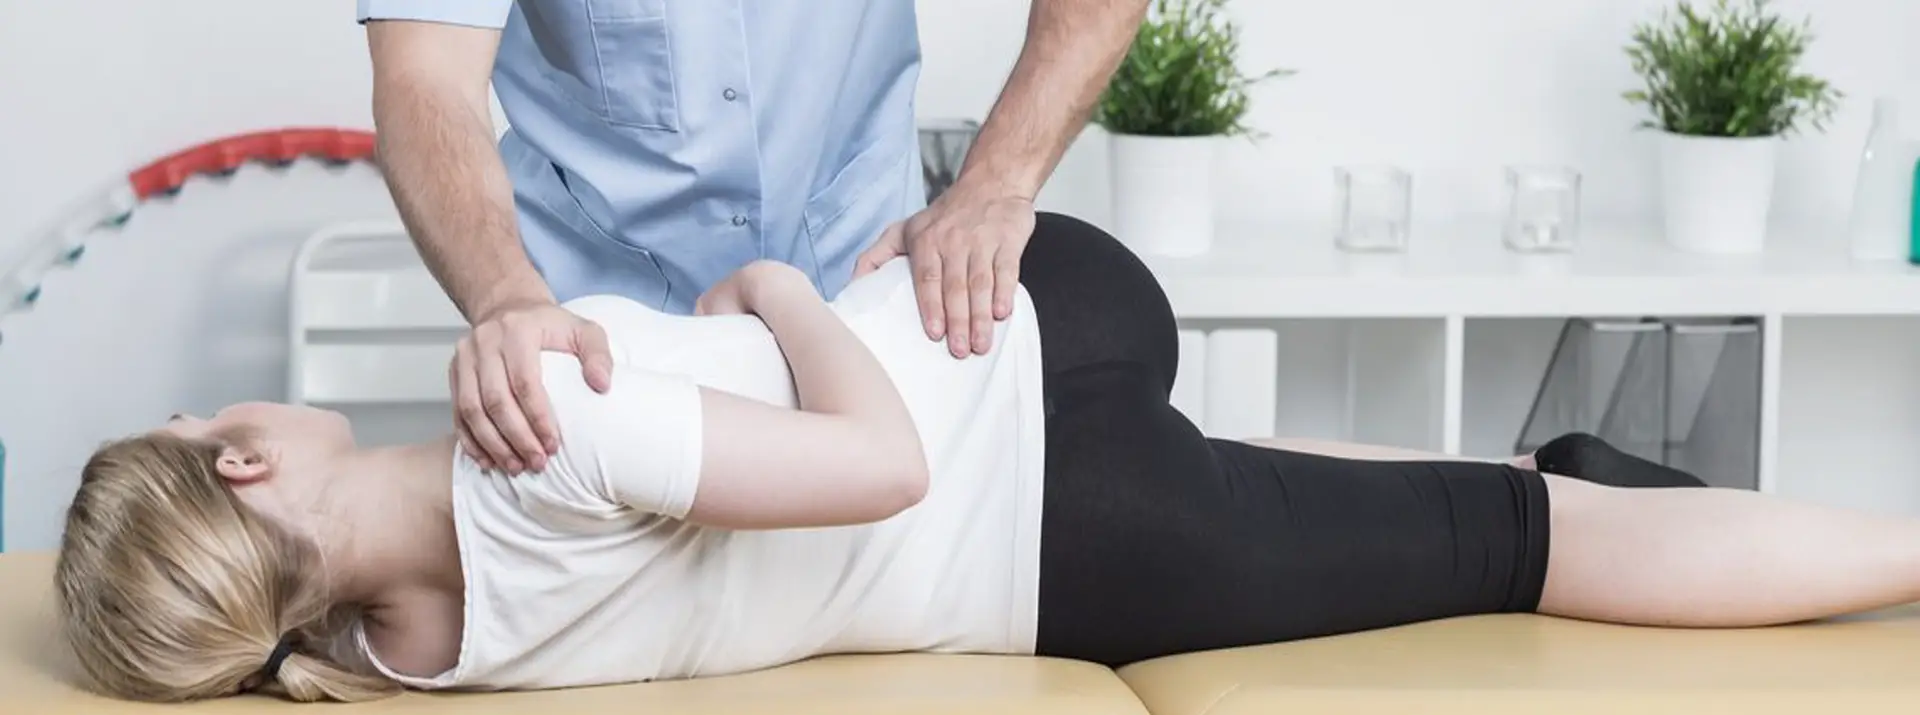 How Does a Chiropractor Adjust Your Back